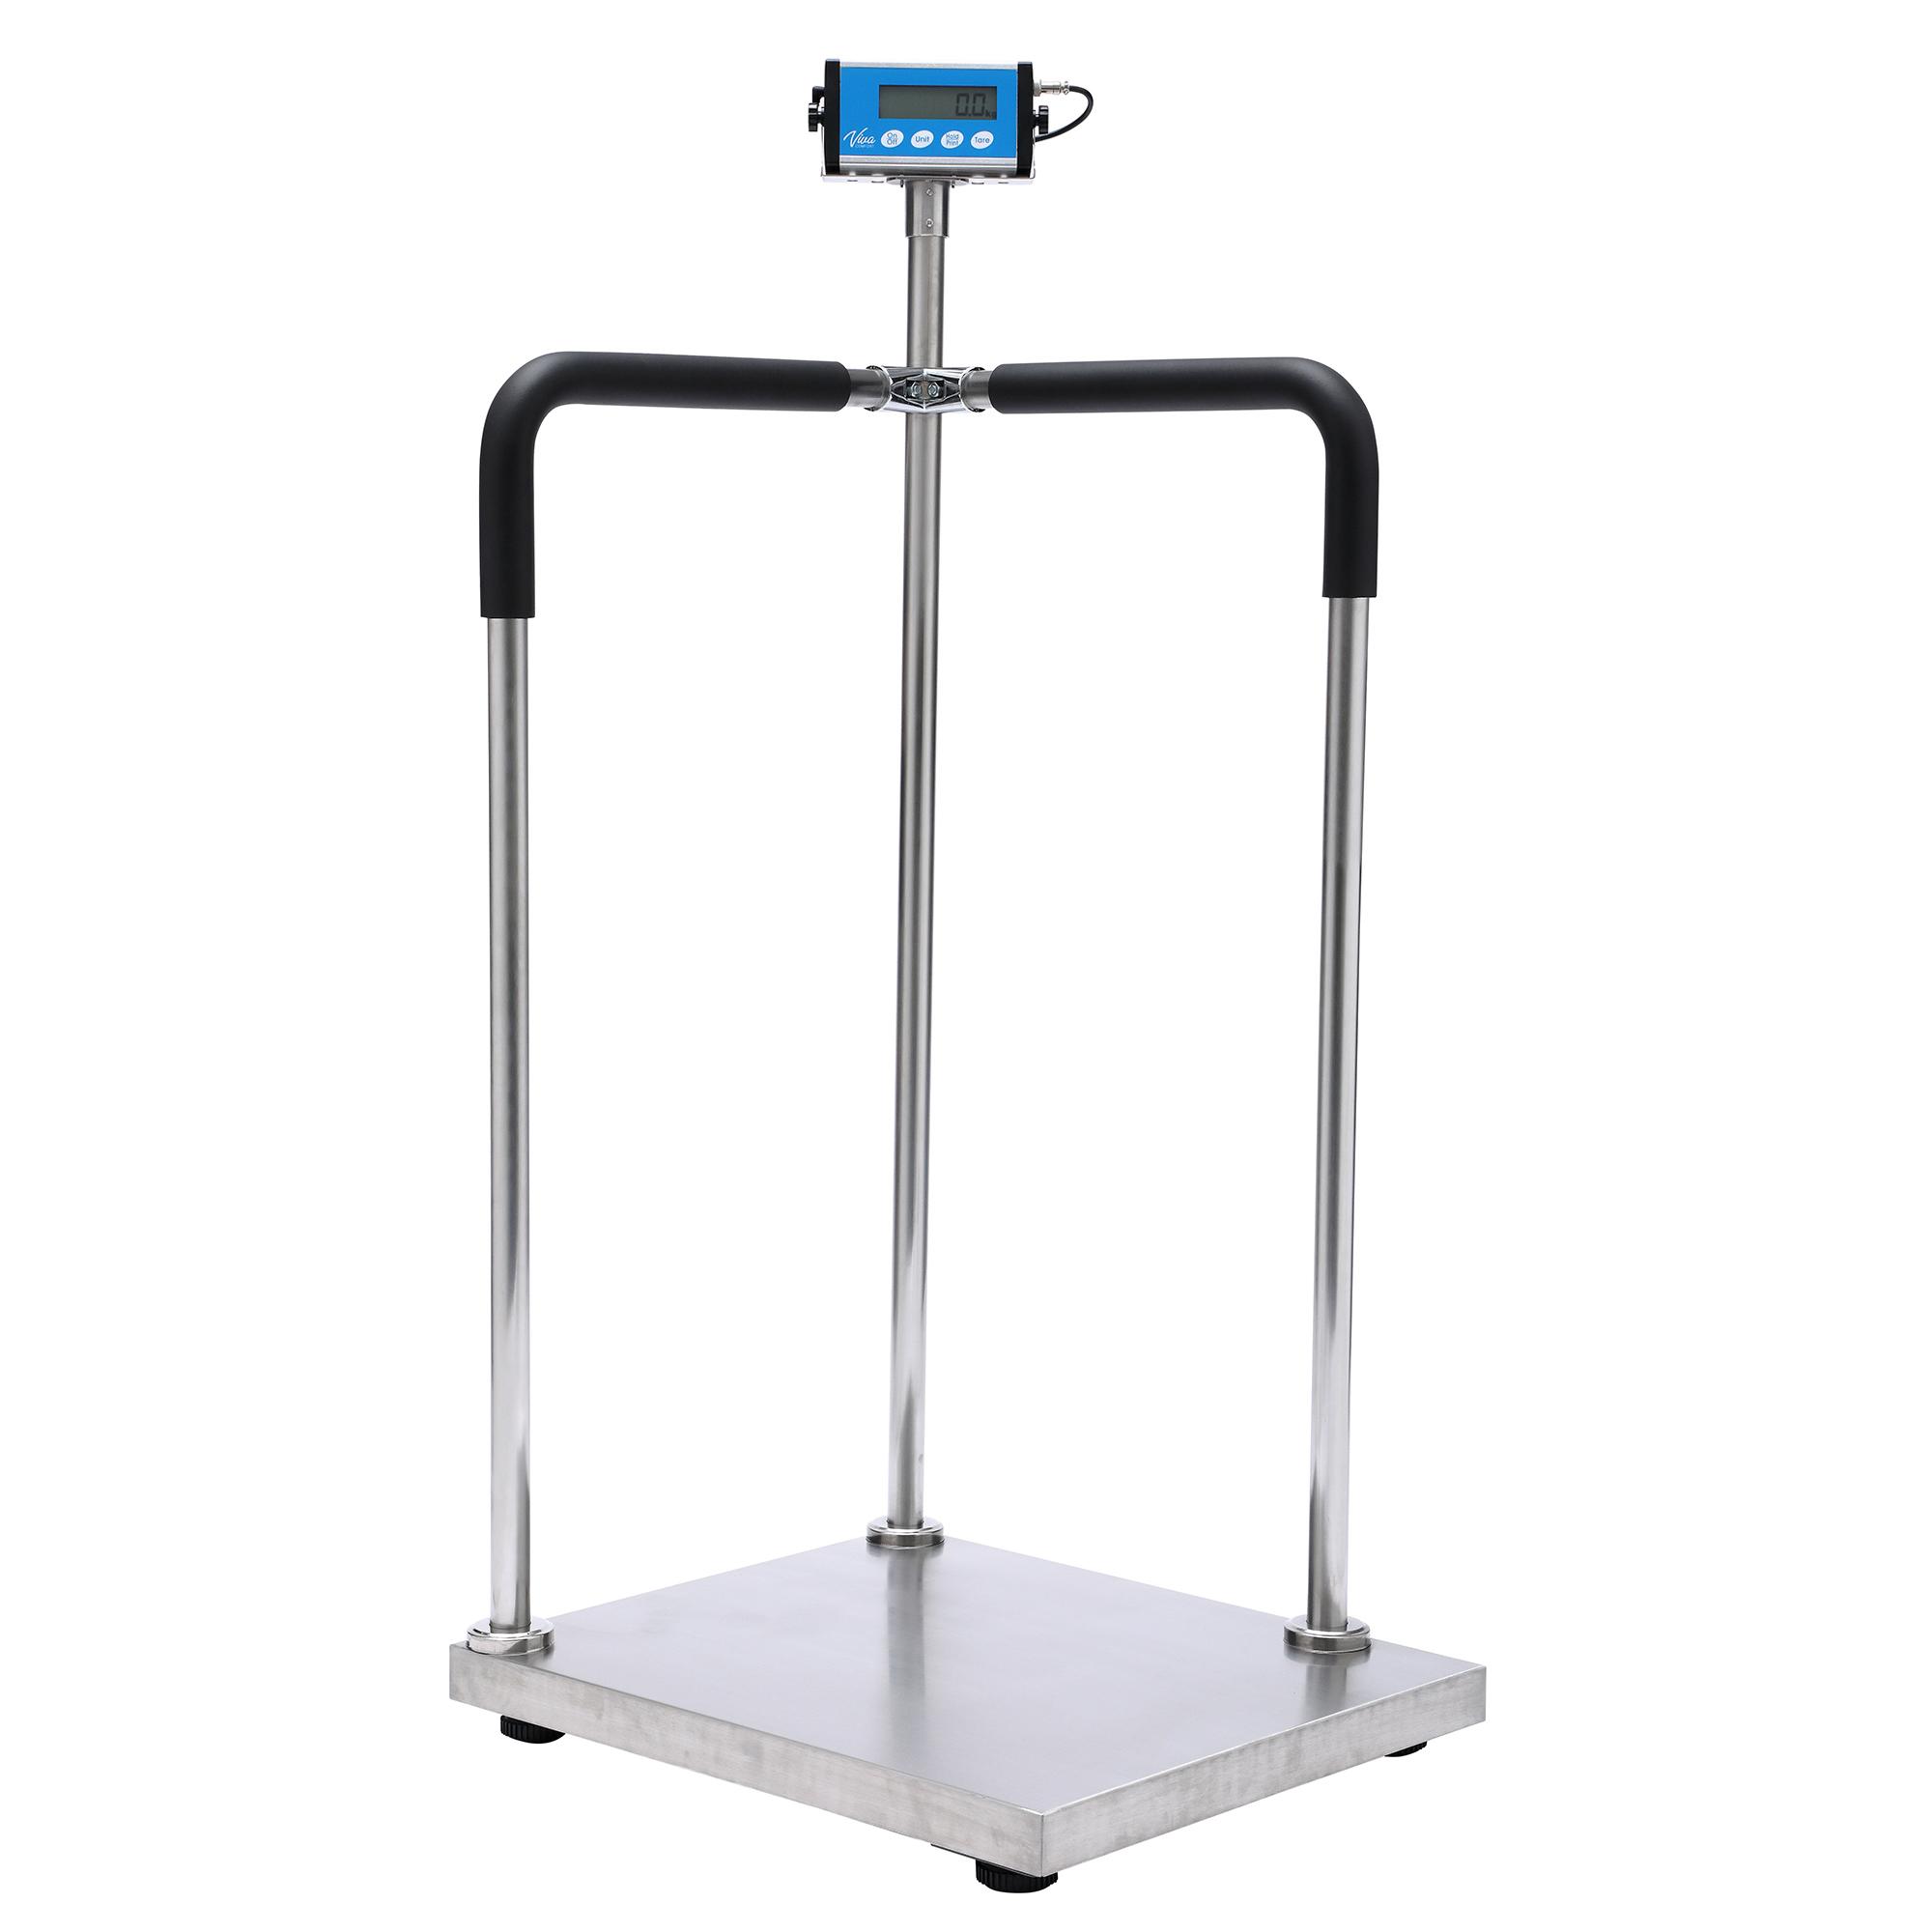 Medical Handrail Scale